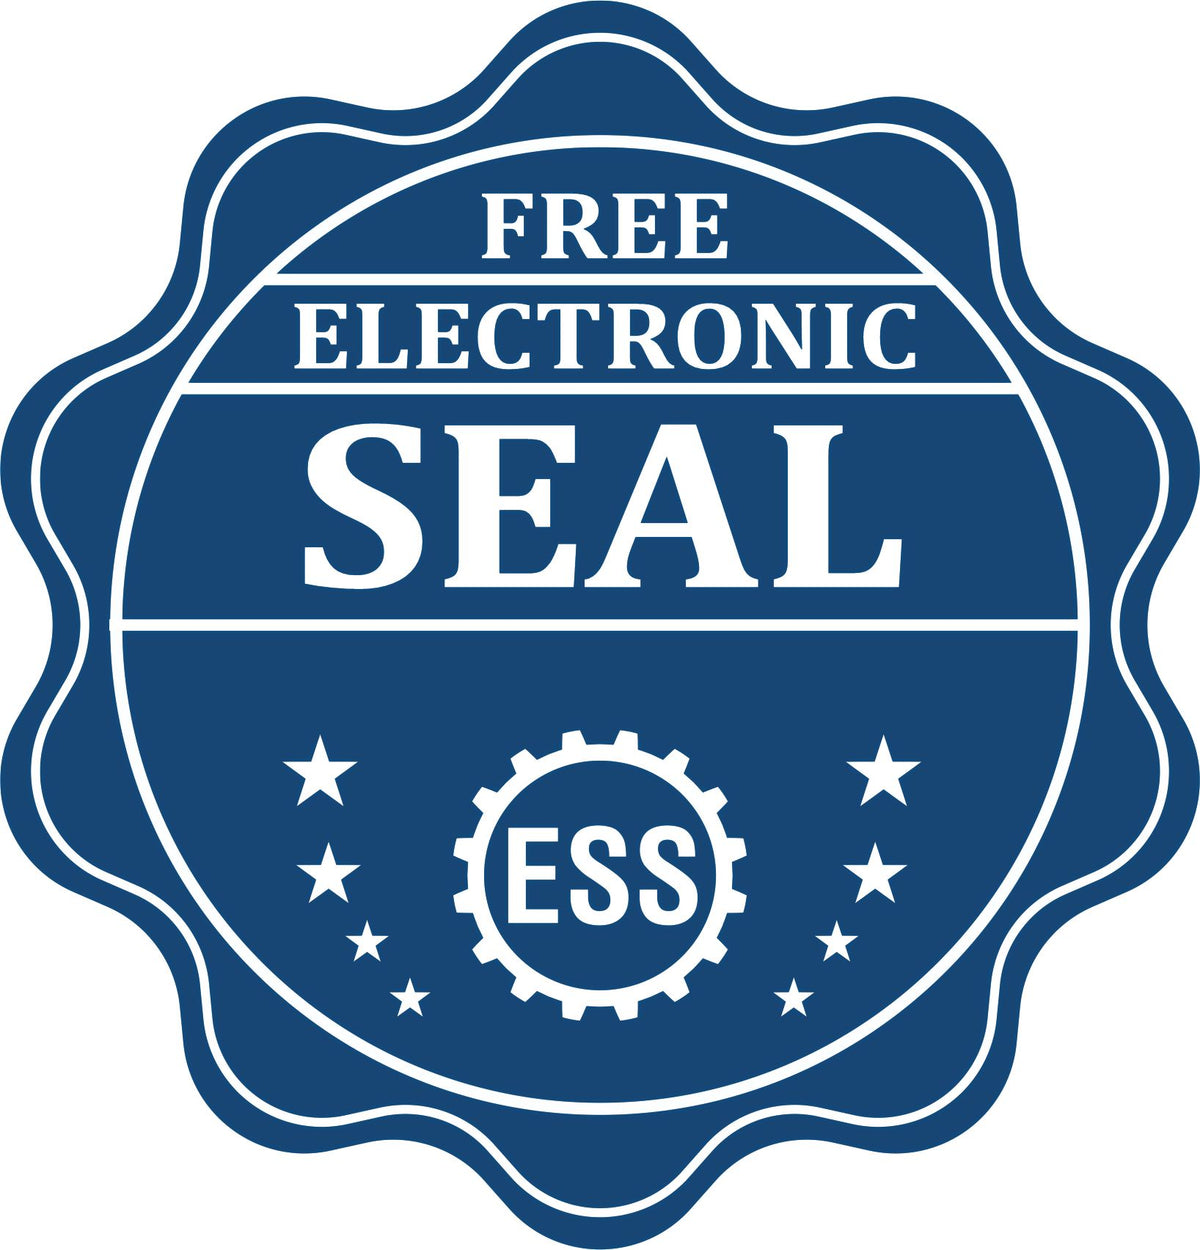 A badge showing a free electronic seal for the Soft Pocket Maine Landscape Architect Embosser with stars and the ESS gear on the emblem.